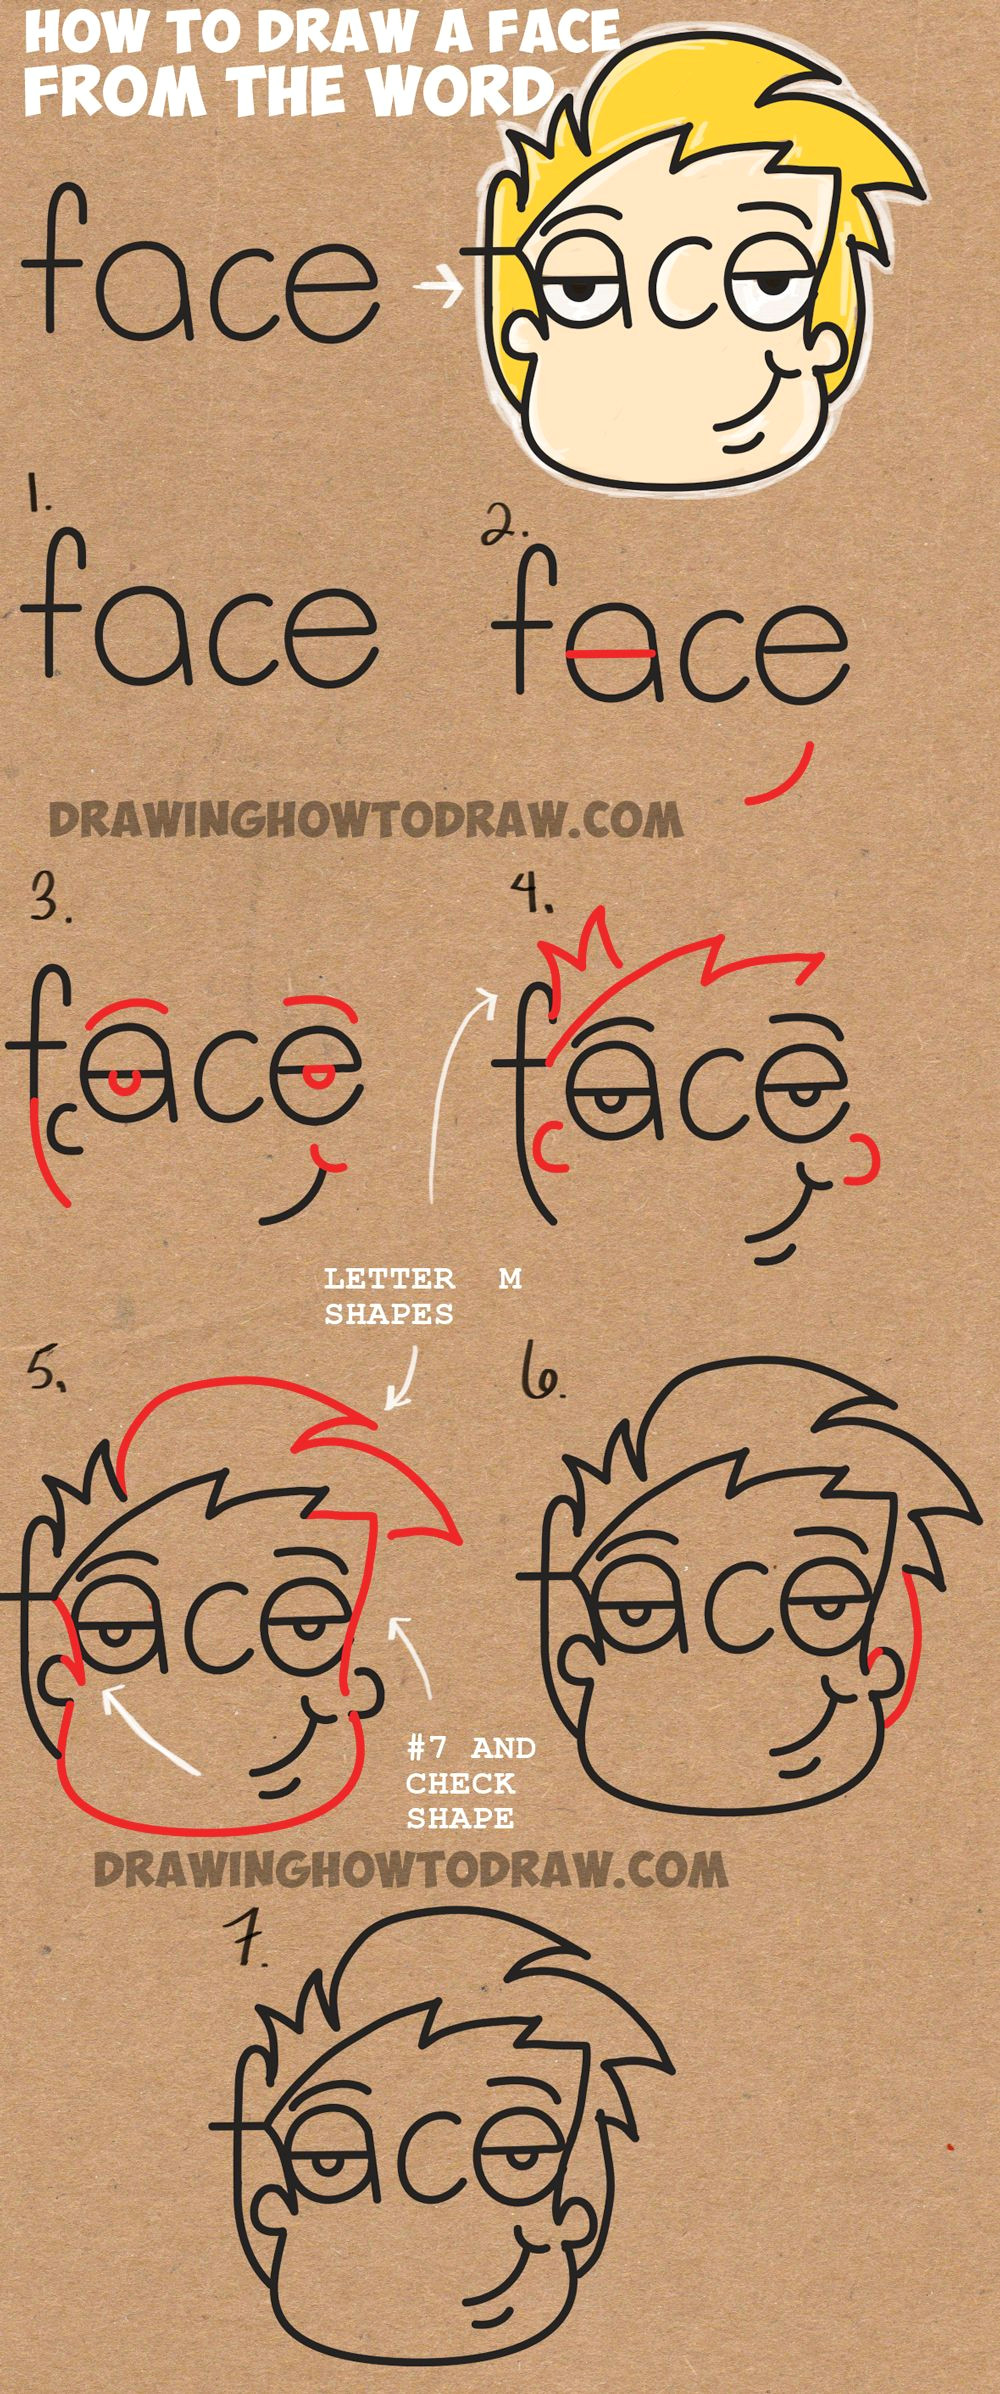 Easy Drawings Using Words How to Draw Cartoon Faces From the Word Face Easy Step by Step